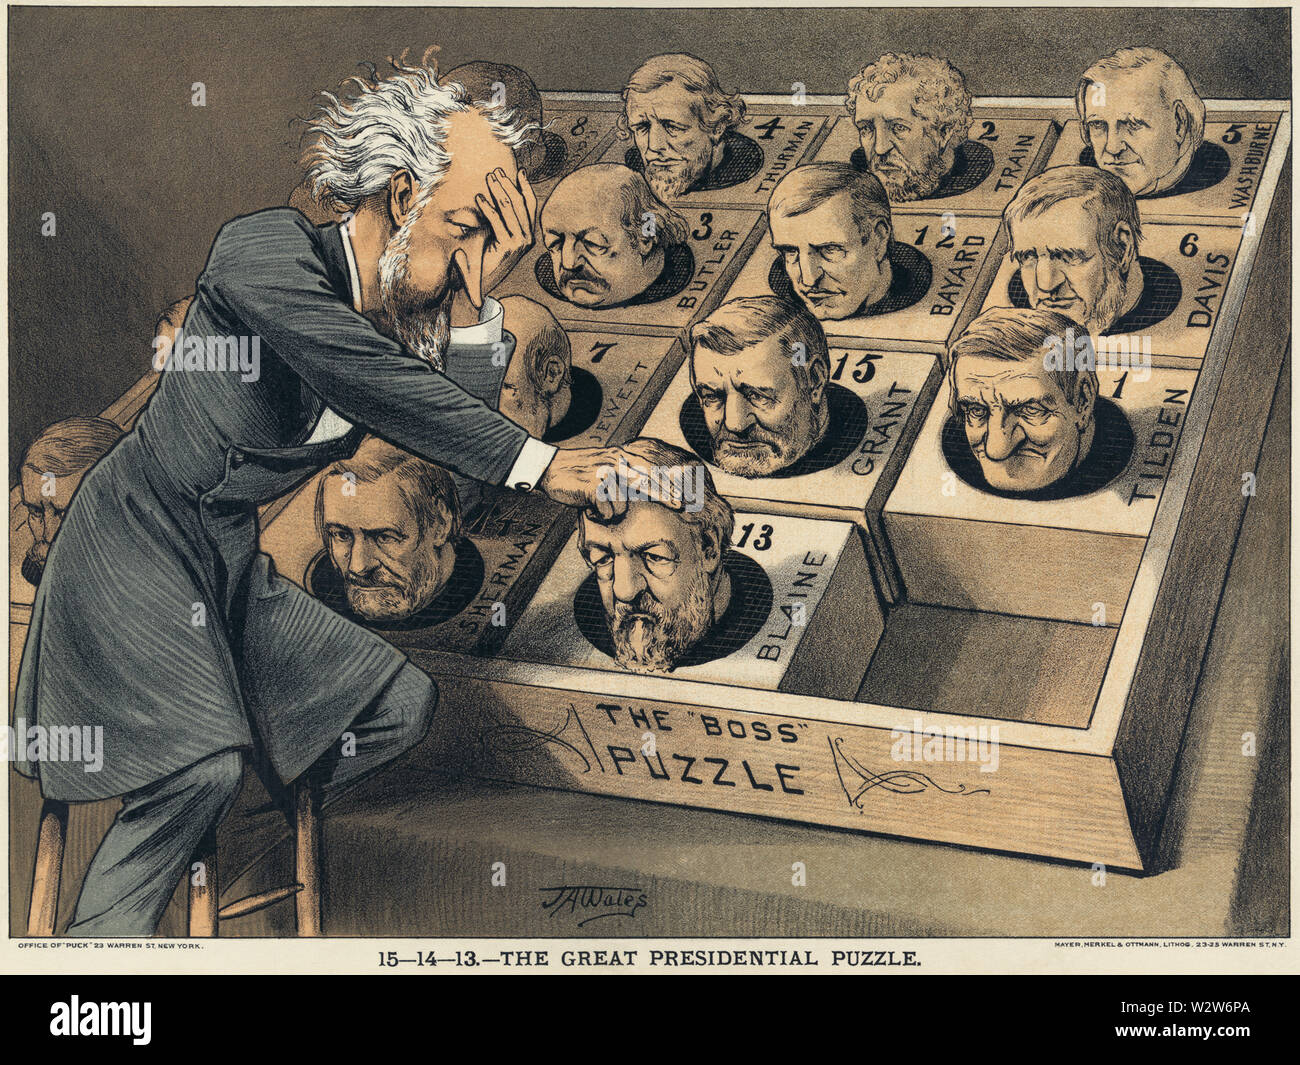 The Great Presidential Puzzle: Illustration shows Senator Roscoe Conkling, leader of the Stalwarts group of the Republican Party, playing a puzzle game. All blocks in the puzzle are the heads of the potential Republican presidential candidates, among them Grant, Sherman, Tilden, and Blaine. Conkling rests his head on one hand and the other on Blaine's head as though ready to move it to the empty space in the box.  Chromolithograph. Parodies the famous 14-15 puzzle (the Rubik's cube of the 1880s). Fran√ßais¬†: The Great Presidential Puzzle¬†: Illustration montrant le s√©nateur Roscoe Conkling, Stock Photo